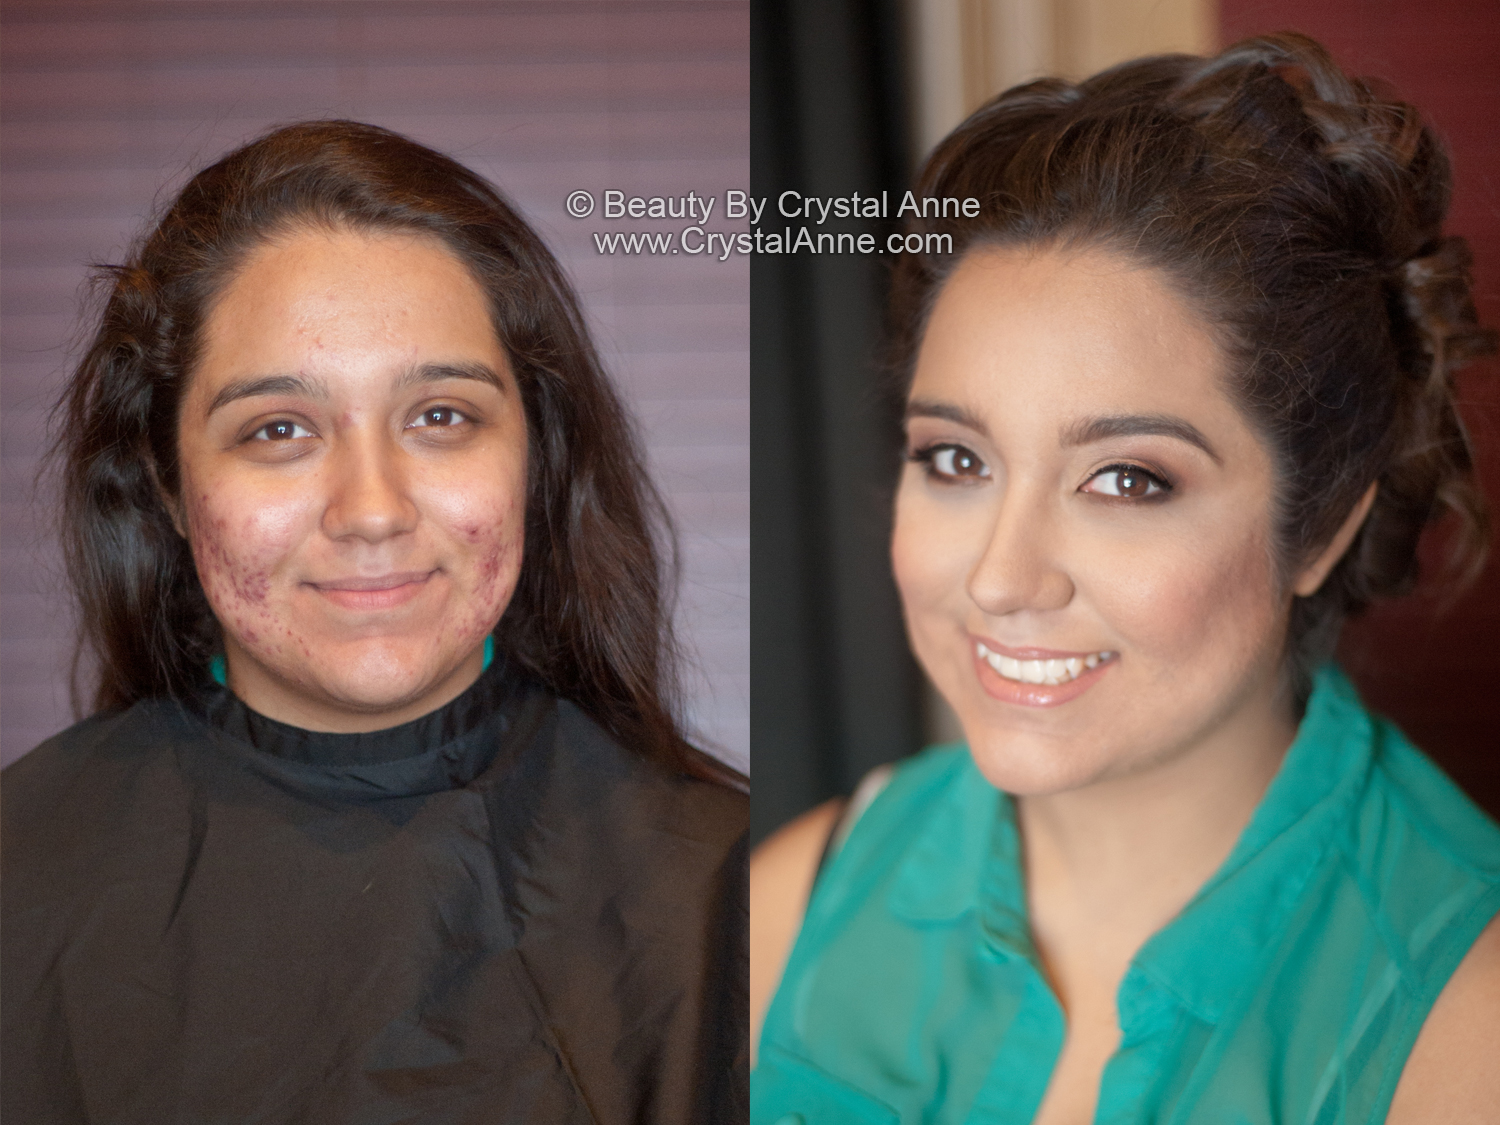 The Differences Between Traditional and Airbrush Makeup